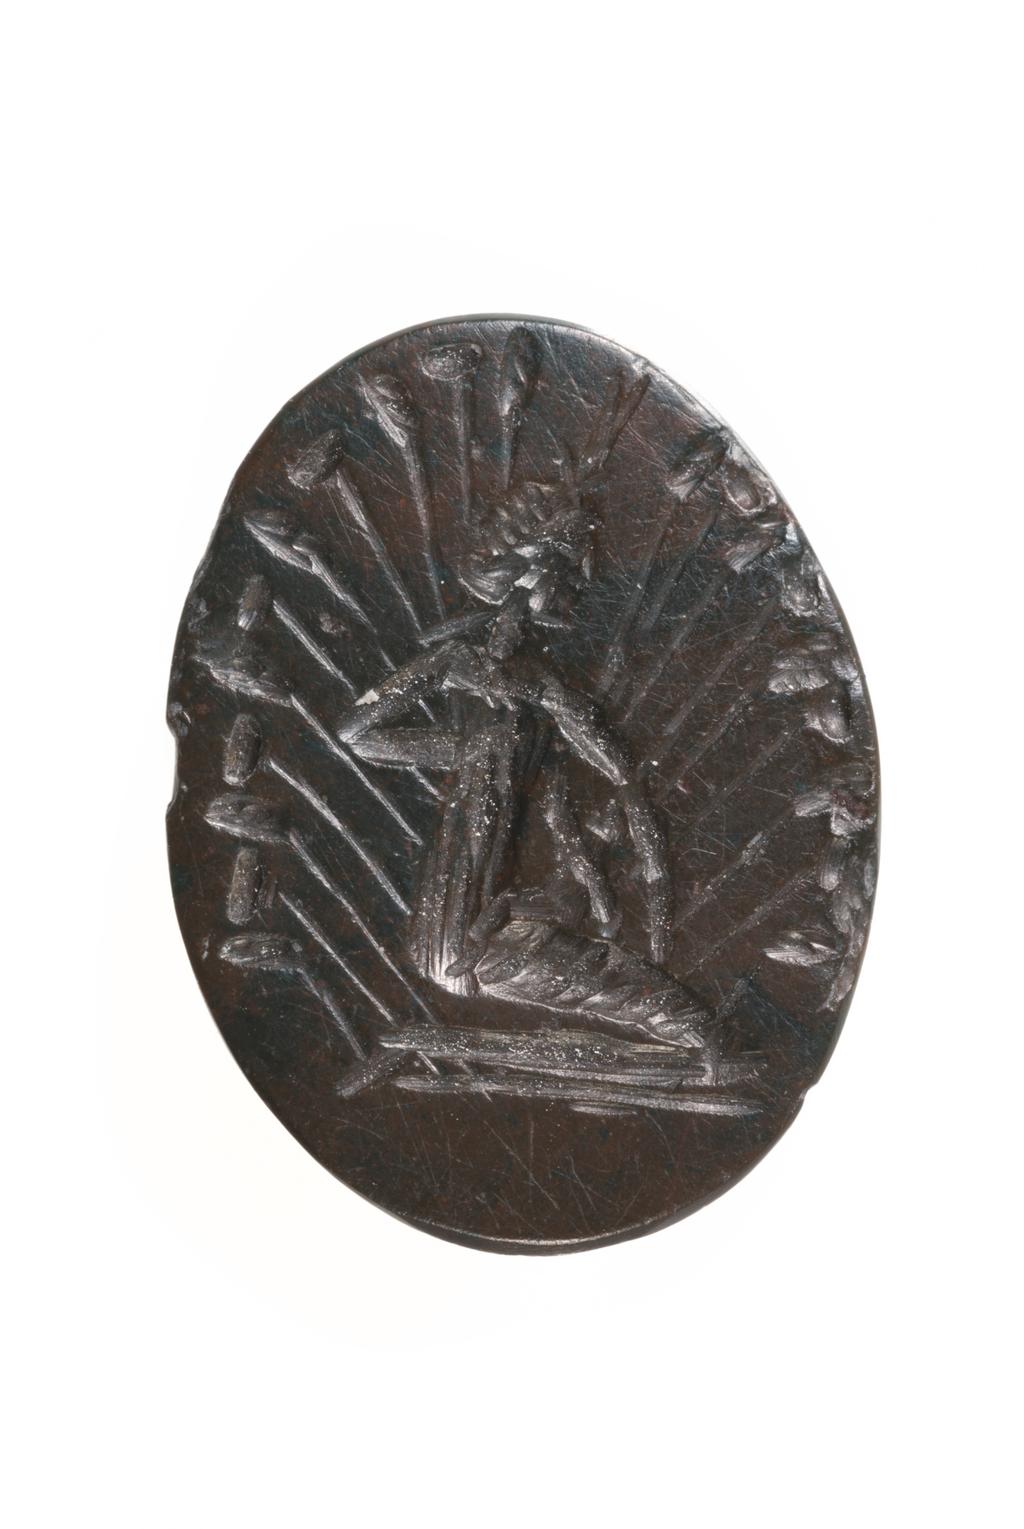 An image of Engraved gems. Magical amulet. Obverse: Isis kneeling in profile to the left, encircled by stalks of papyrus arranged like rays. She holds the infant Horus upon her knees. Her hair is bound in a bun on the nape of her neck, and on her brow is the lotus diadem. Ground line. reverse: blank. Intaglio cutting, bloodstone, 17 mm x 13 mm, circa 100-circa 300. Roman Imperial.